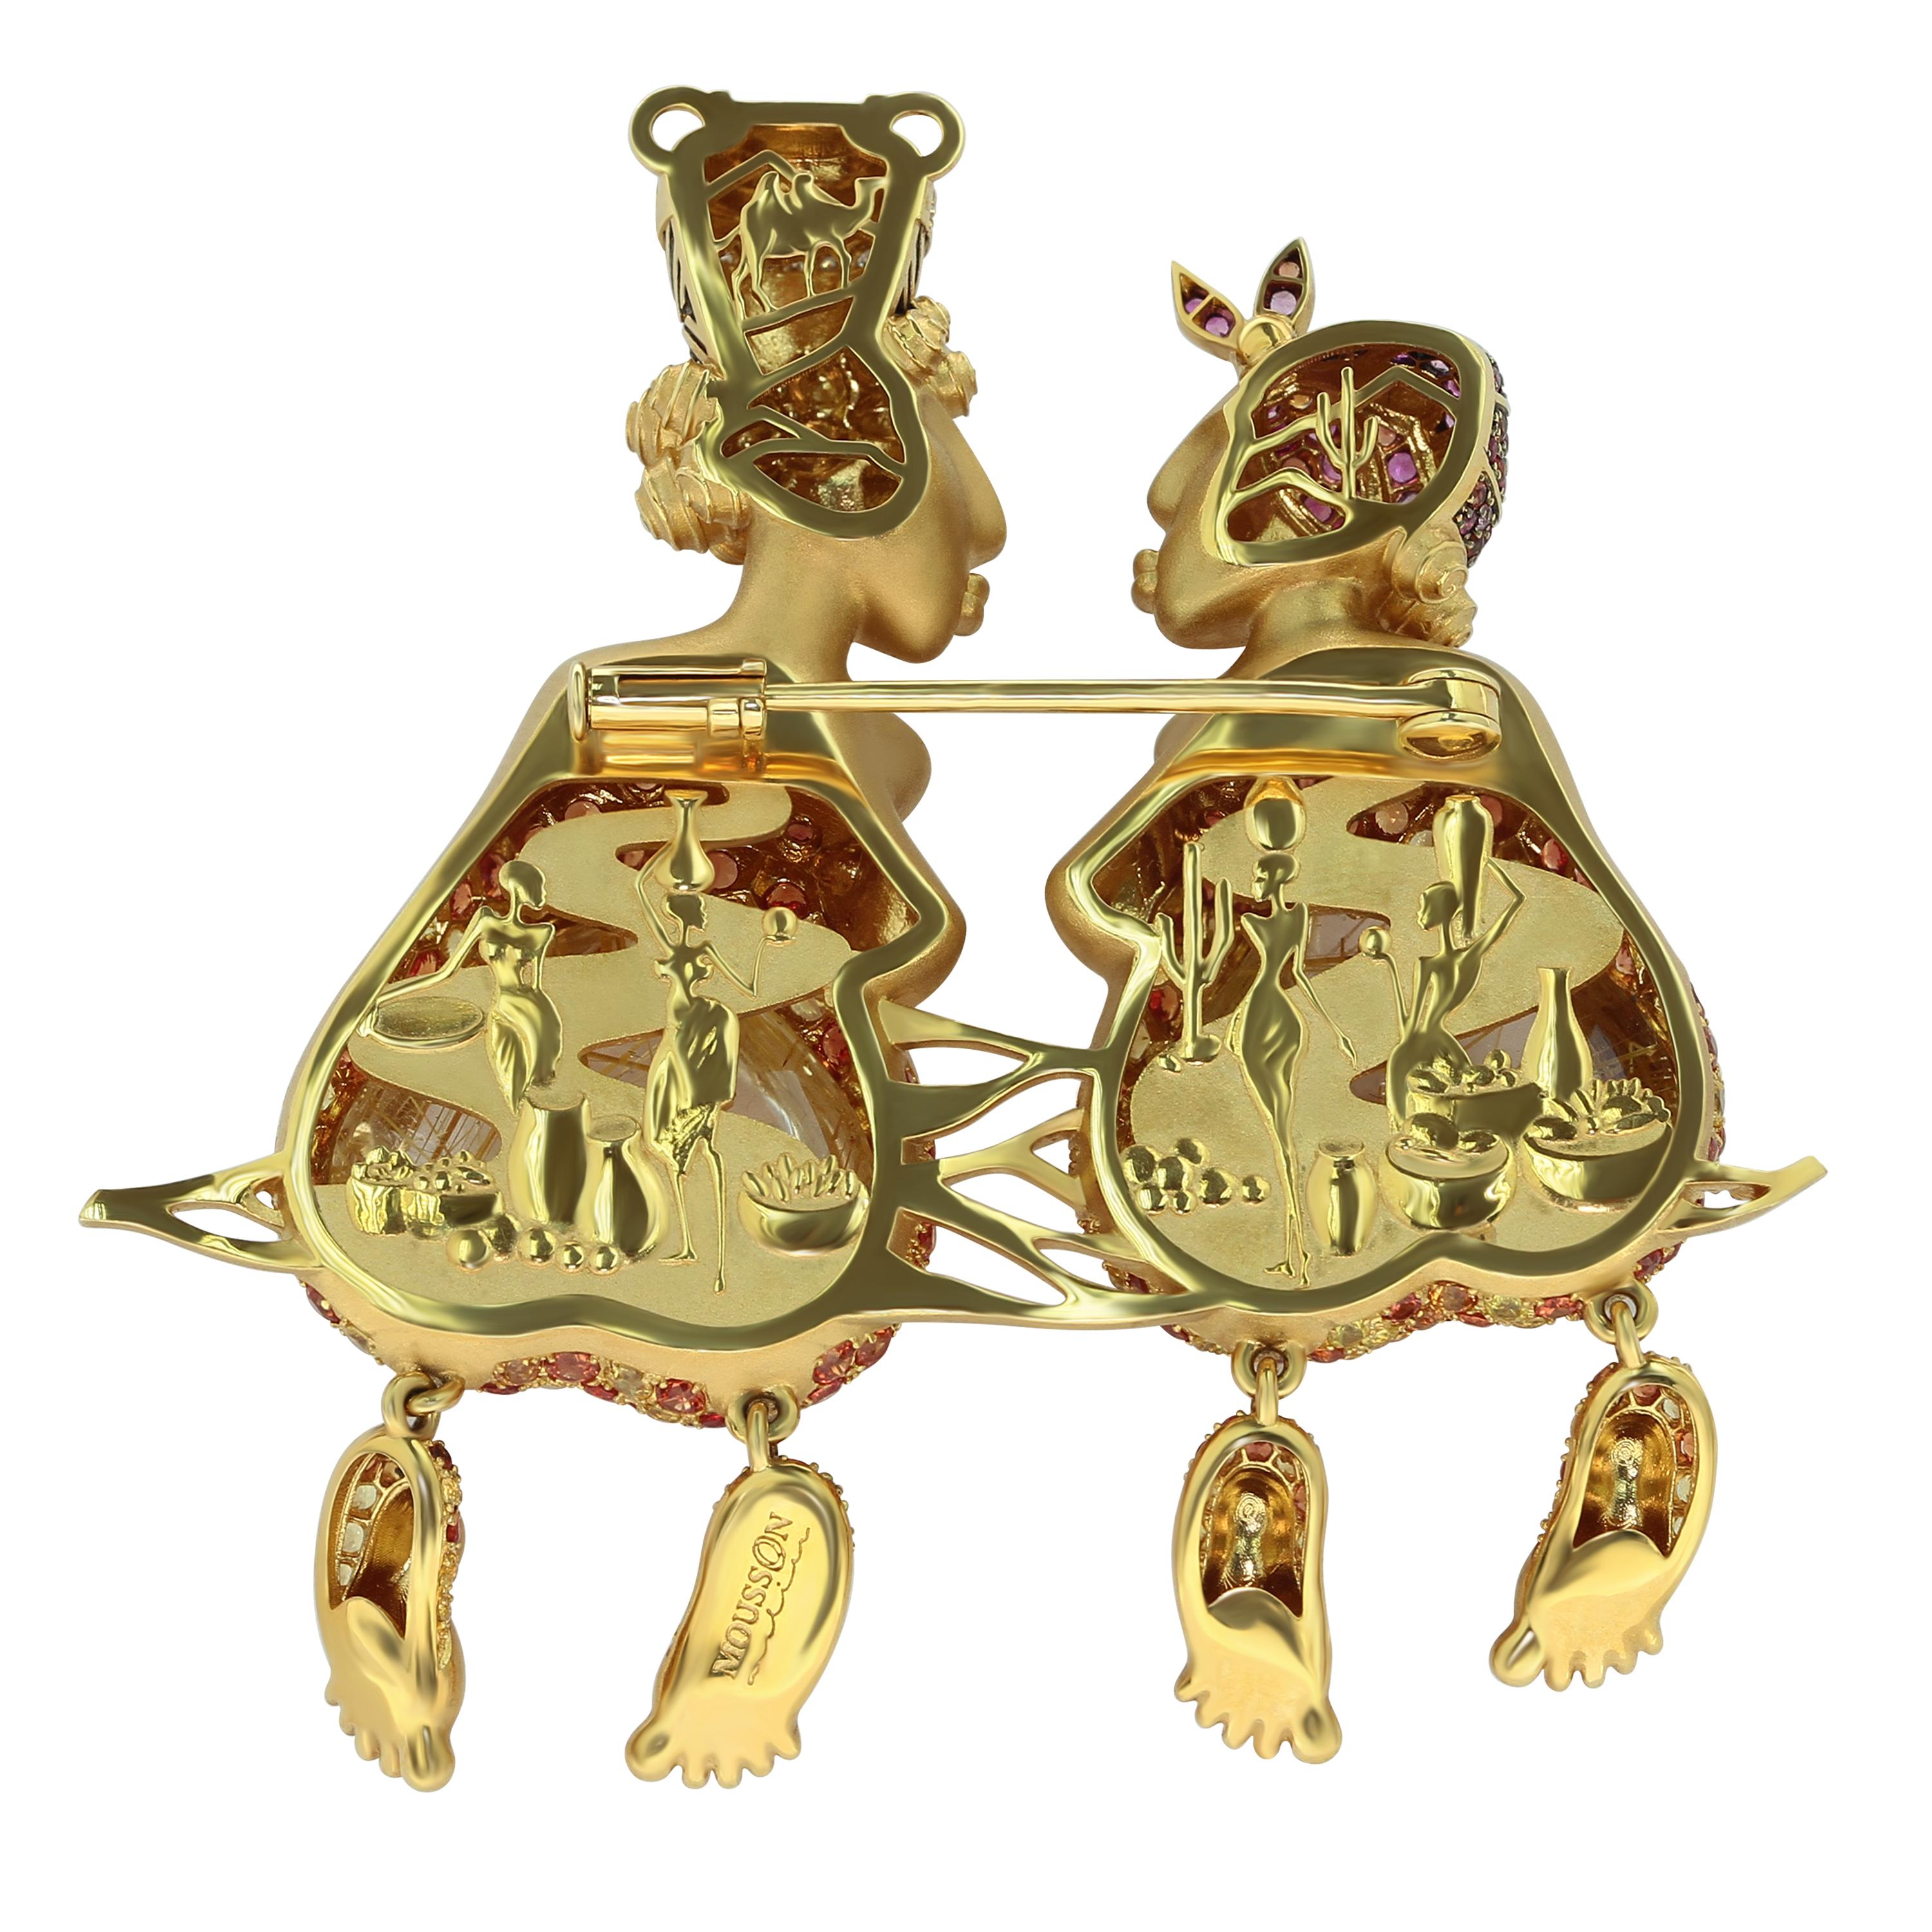 Rutilated Quartz 42.54 Carat Diamonds Sapphires 18 Karat Yellow Gold Friends Brooch
What could be more interesting than depicting a whole scene from life in jewellery? Pay attention to the two friends who sat down to have a jaw, everything in them